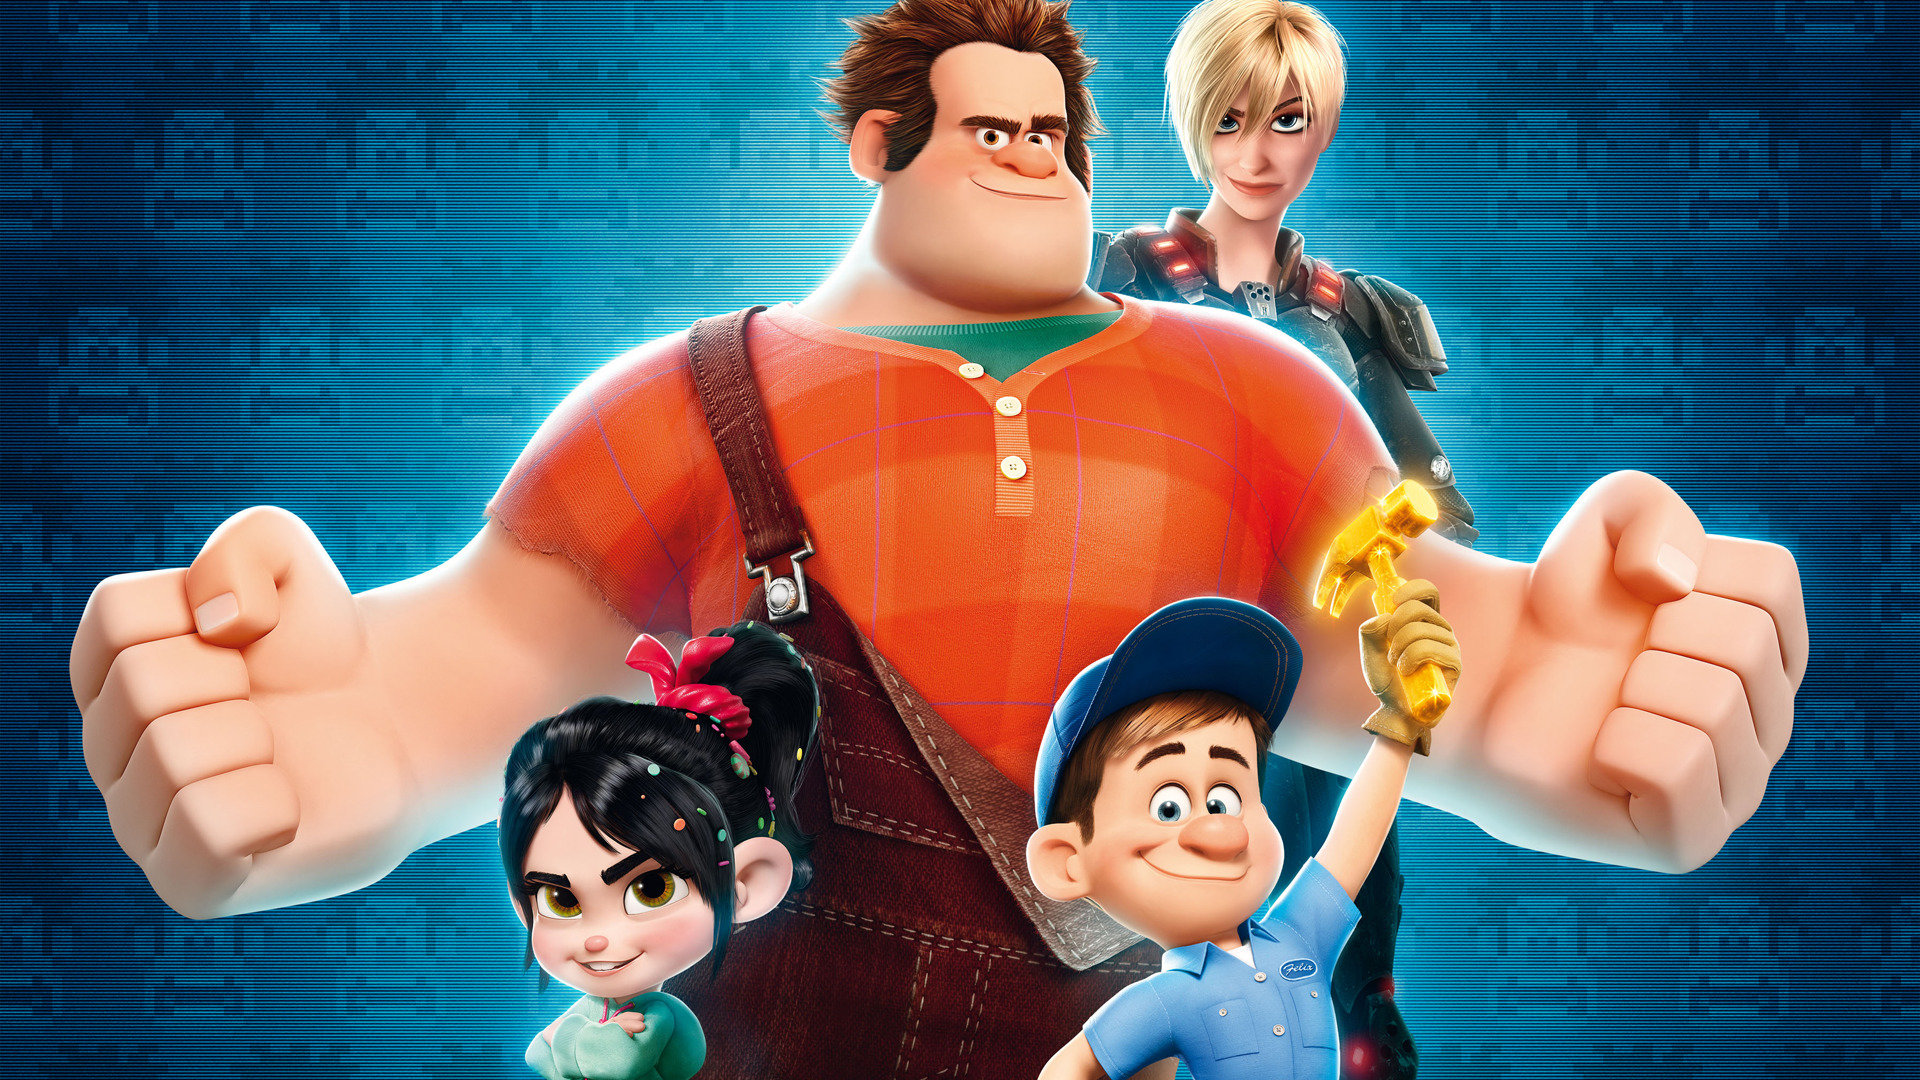 Download full hd 1920x1080 Wreck-It Ralph PC background ID:395007 for free